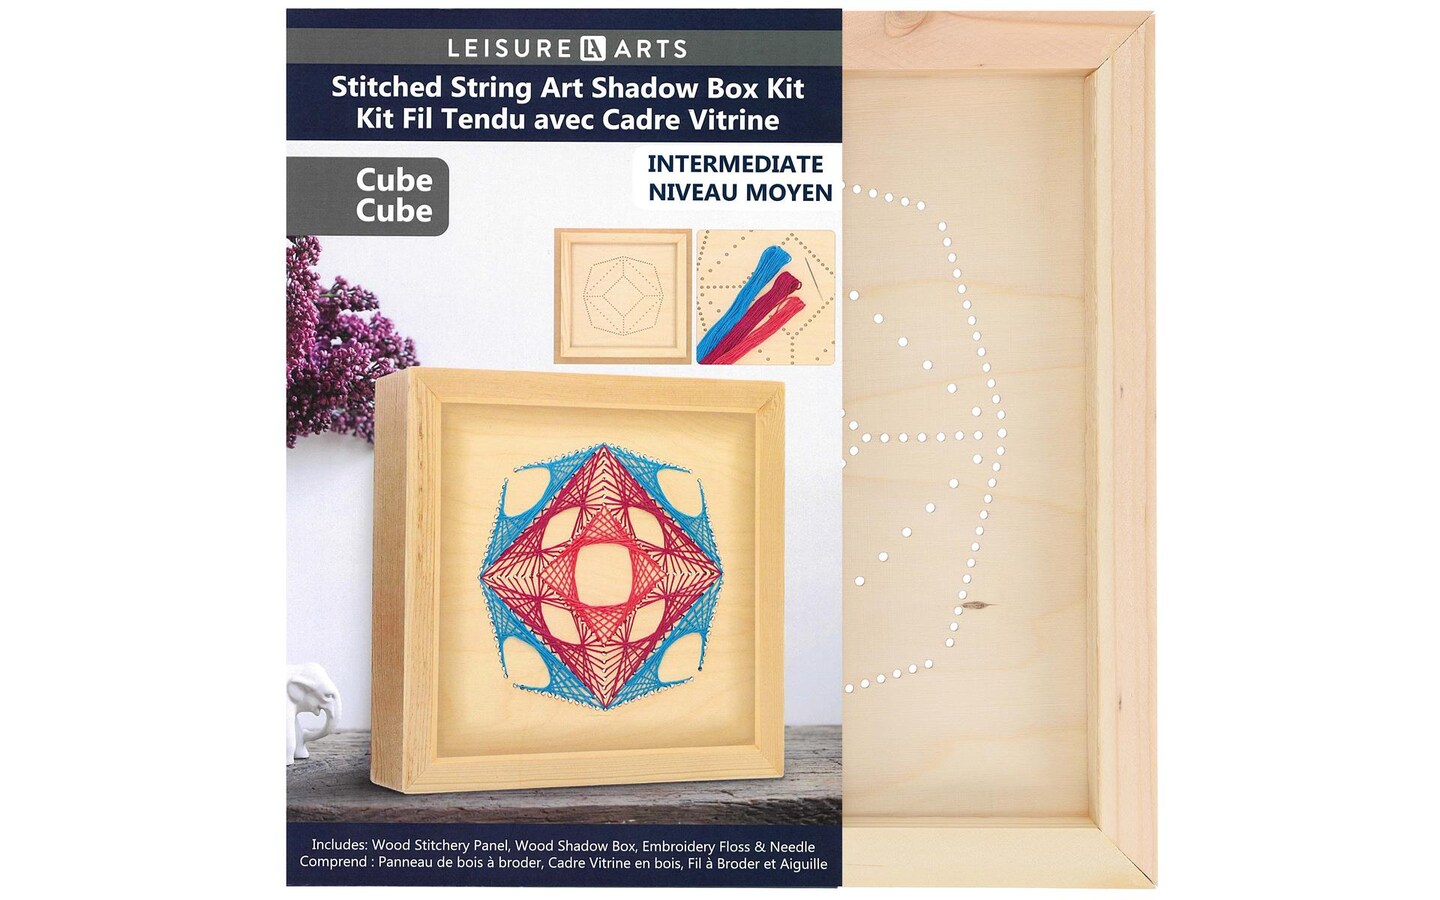 Wood Stitched String Art Kit with Shadow Box Cube - adult or kids